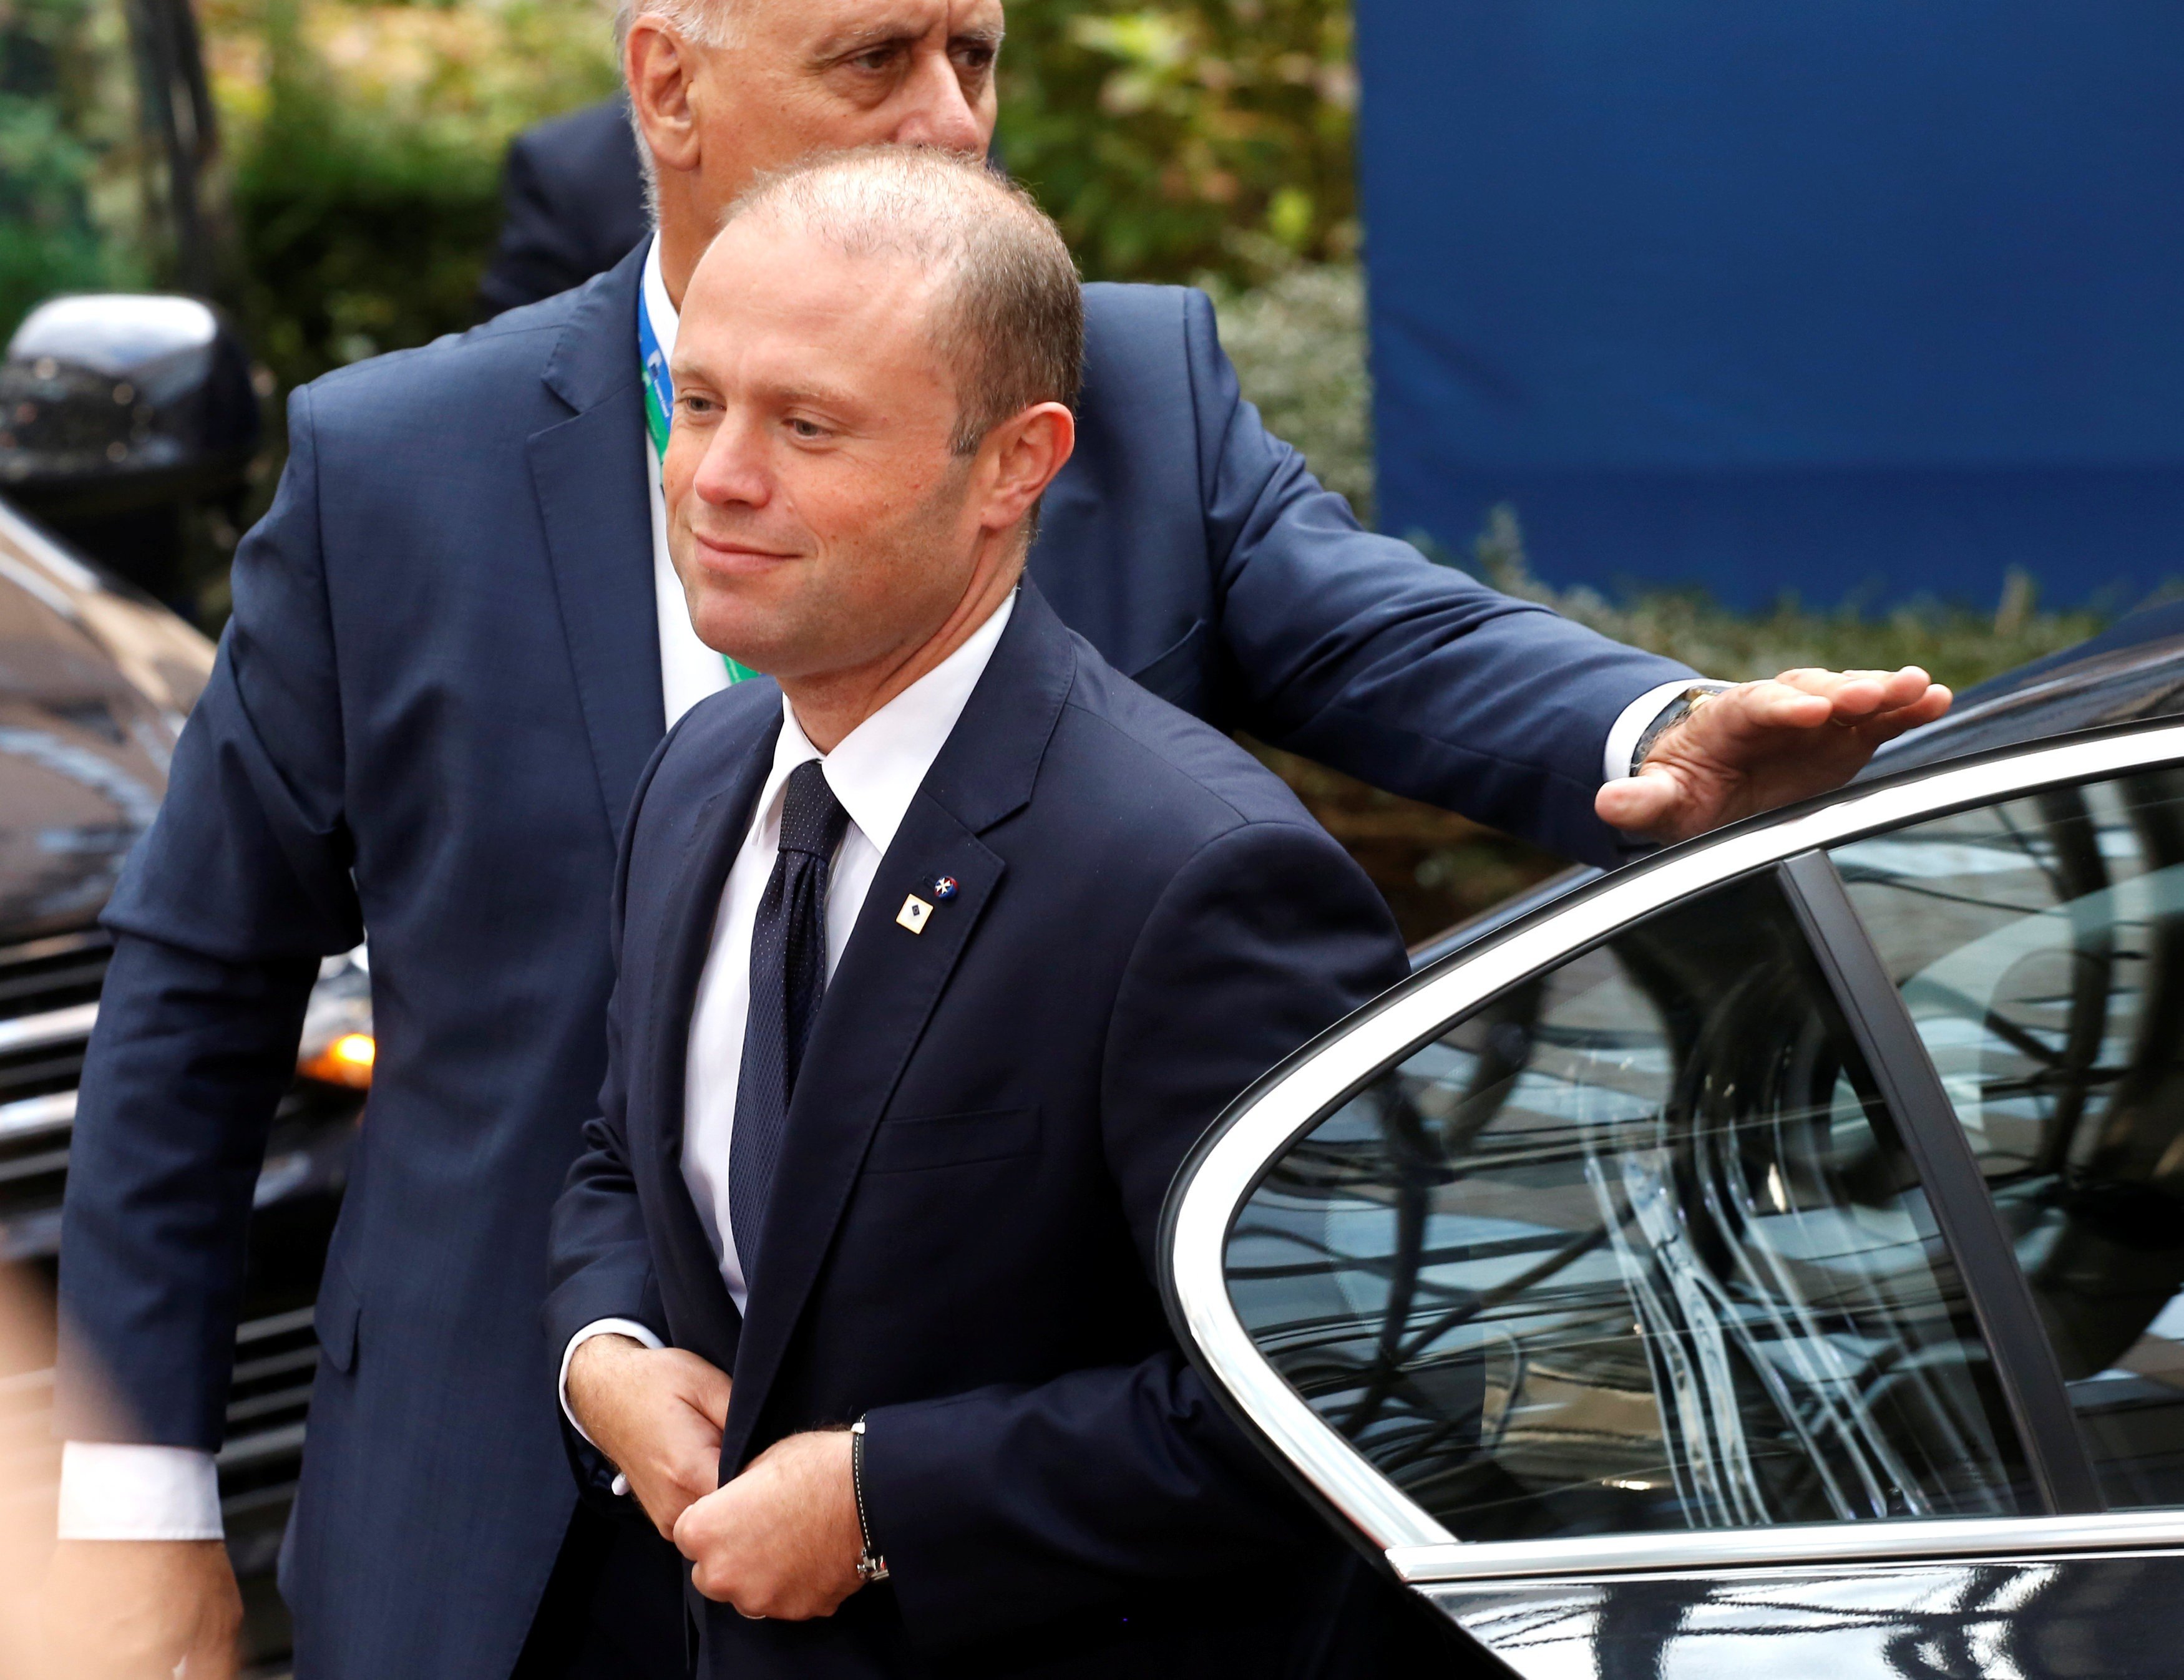 Malta's Prime Minister Joseph Muscat arrives at the EU summit meeting in Brussels, Belgium, on Thursday. Photo: Reuters